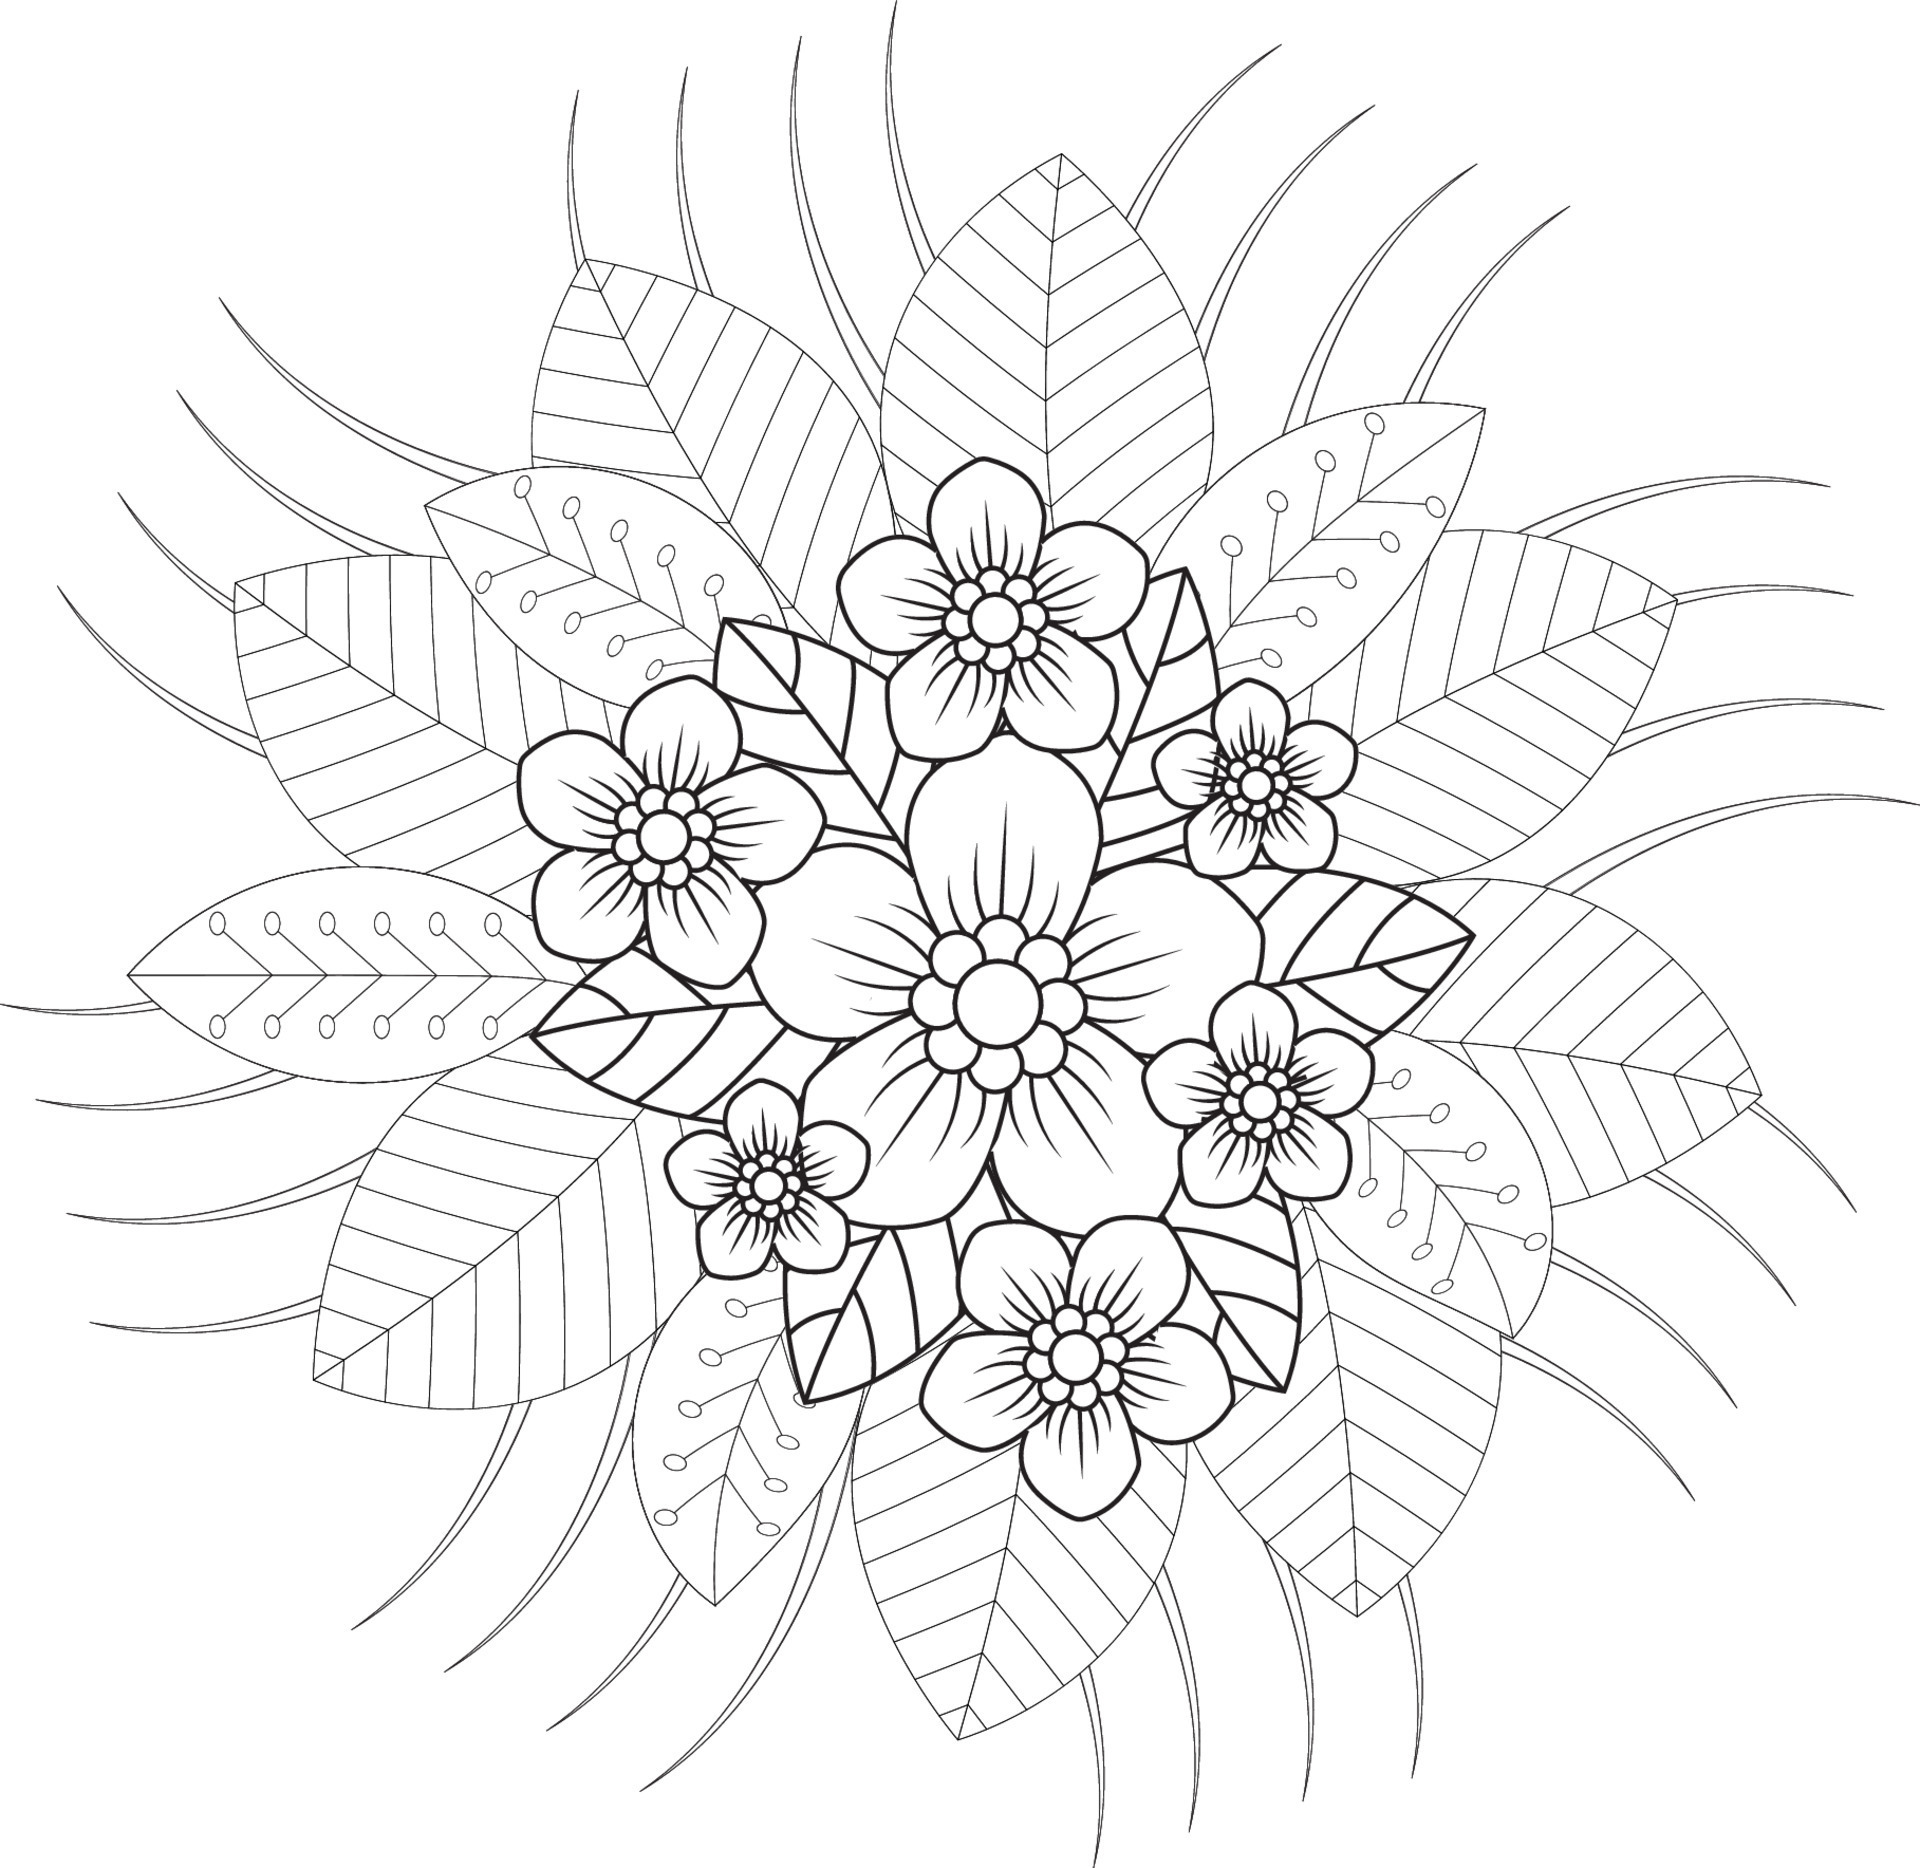 https://static.vecteezy.com/system/resources/previews/022/698/345/original/adult-coloring-page-with-floral-style-outline-flower-pattern-in-mehndi-style-doodle-ornament-in-black-and-white-free-free-vector.jpg